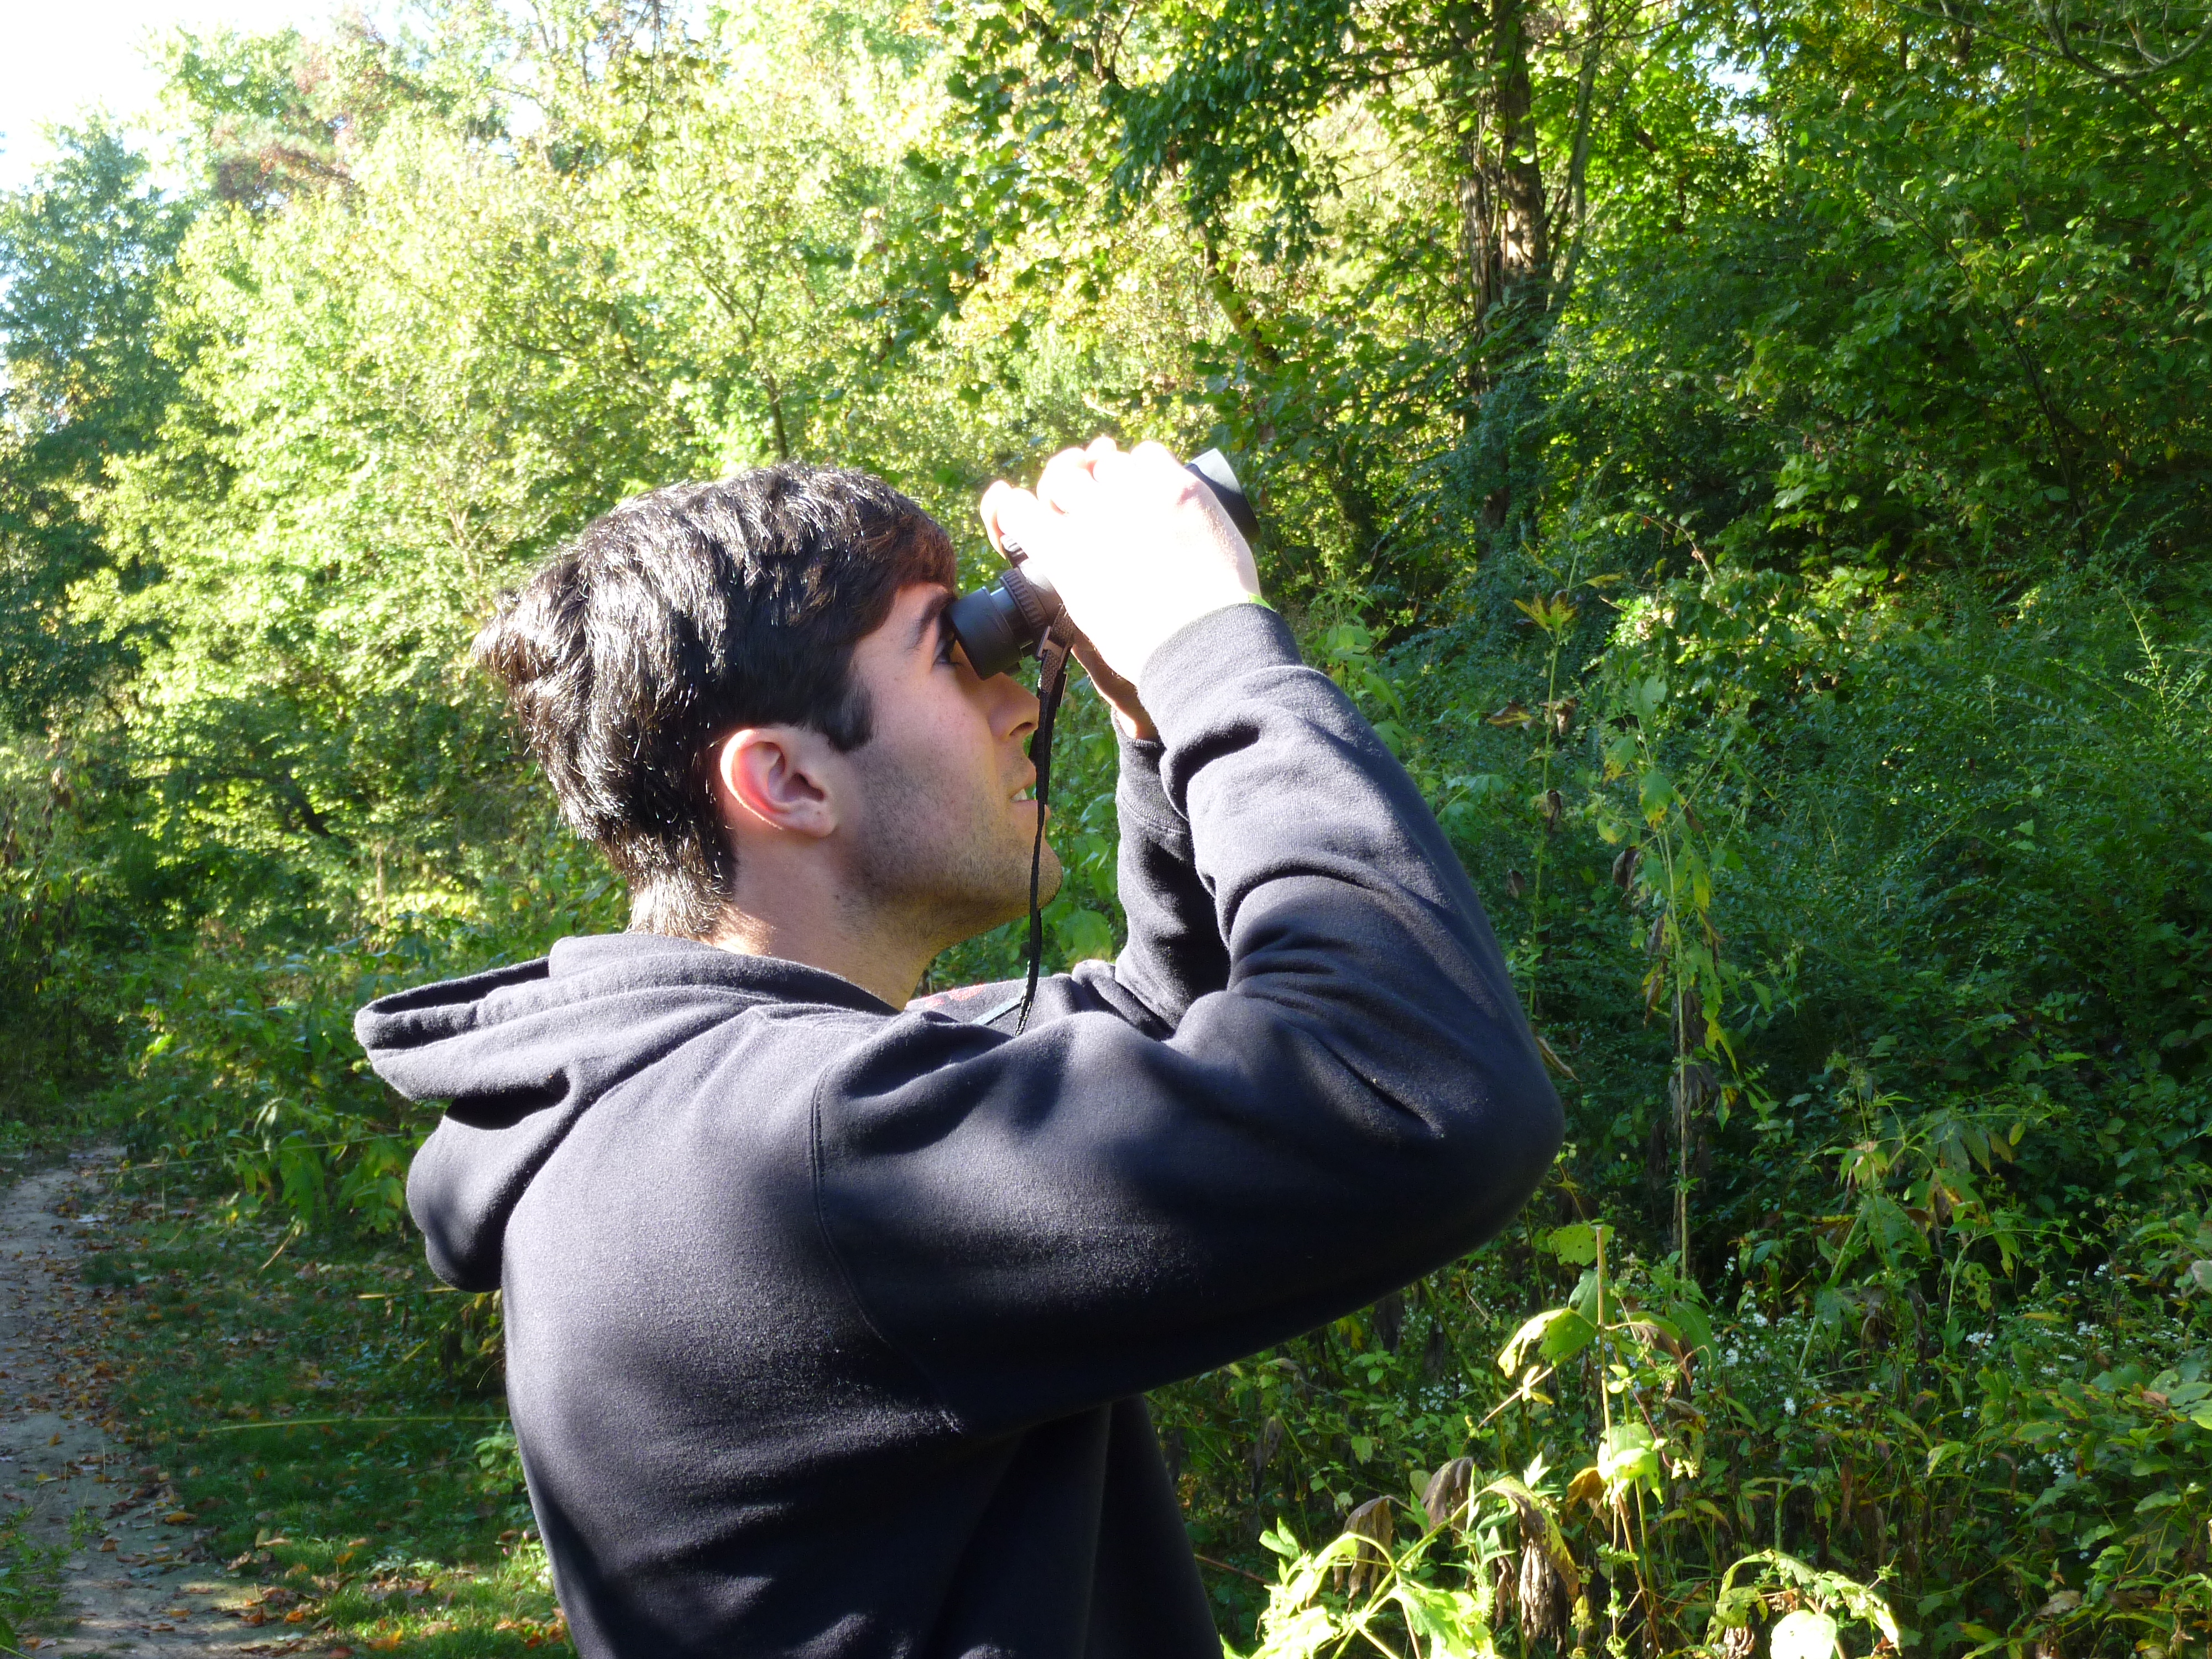 a young man looks through binoculars in a wooded area